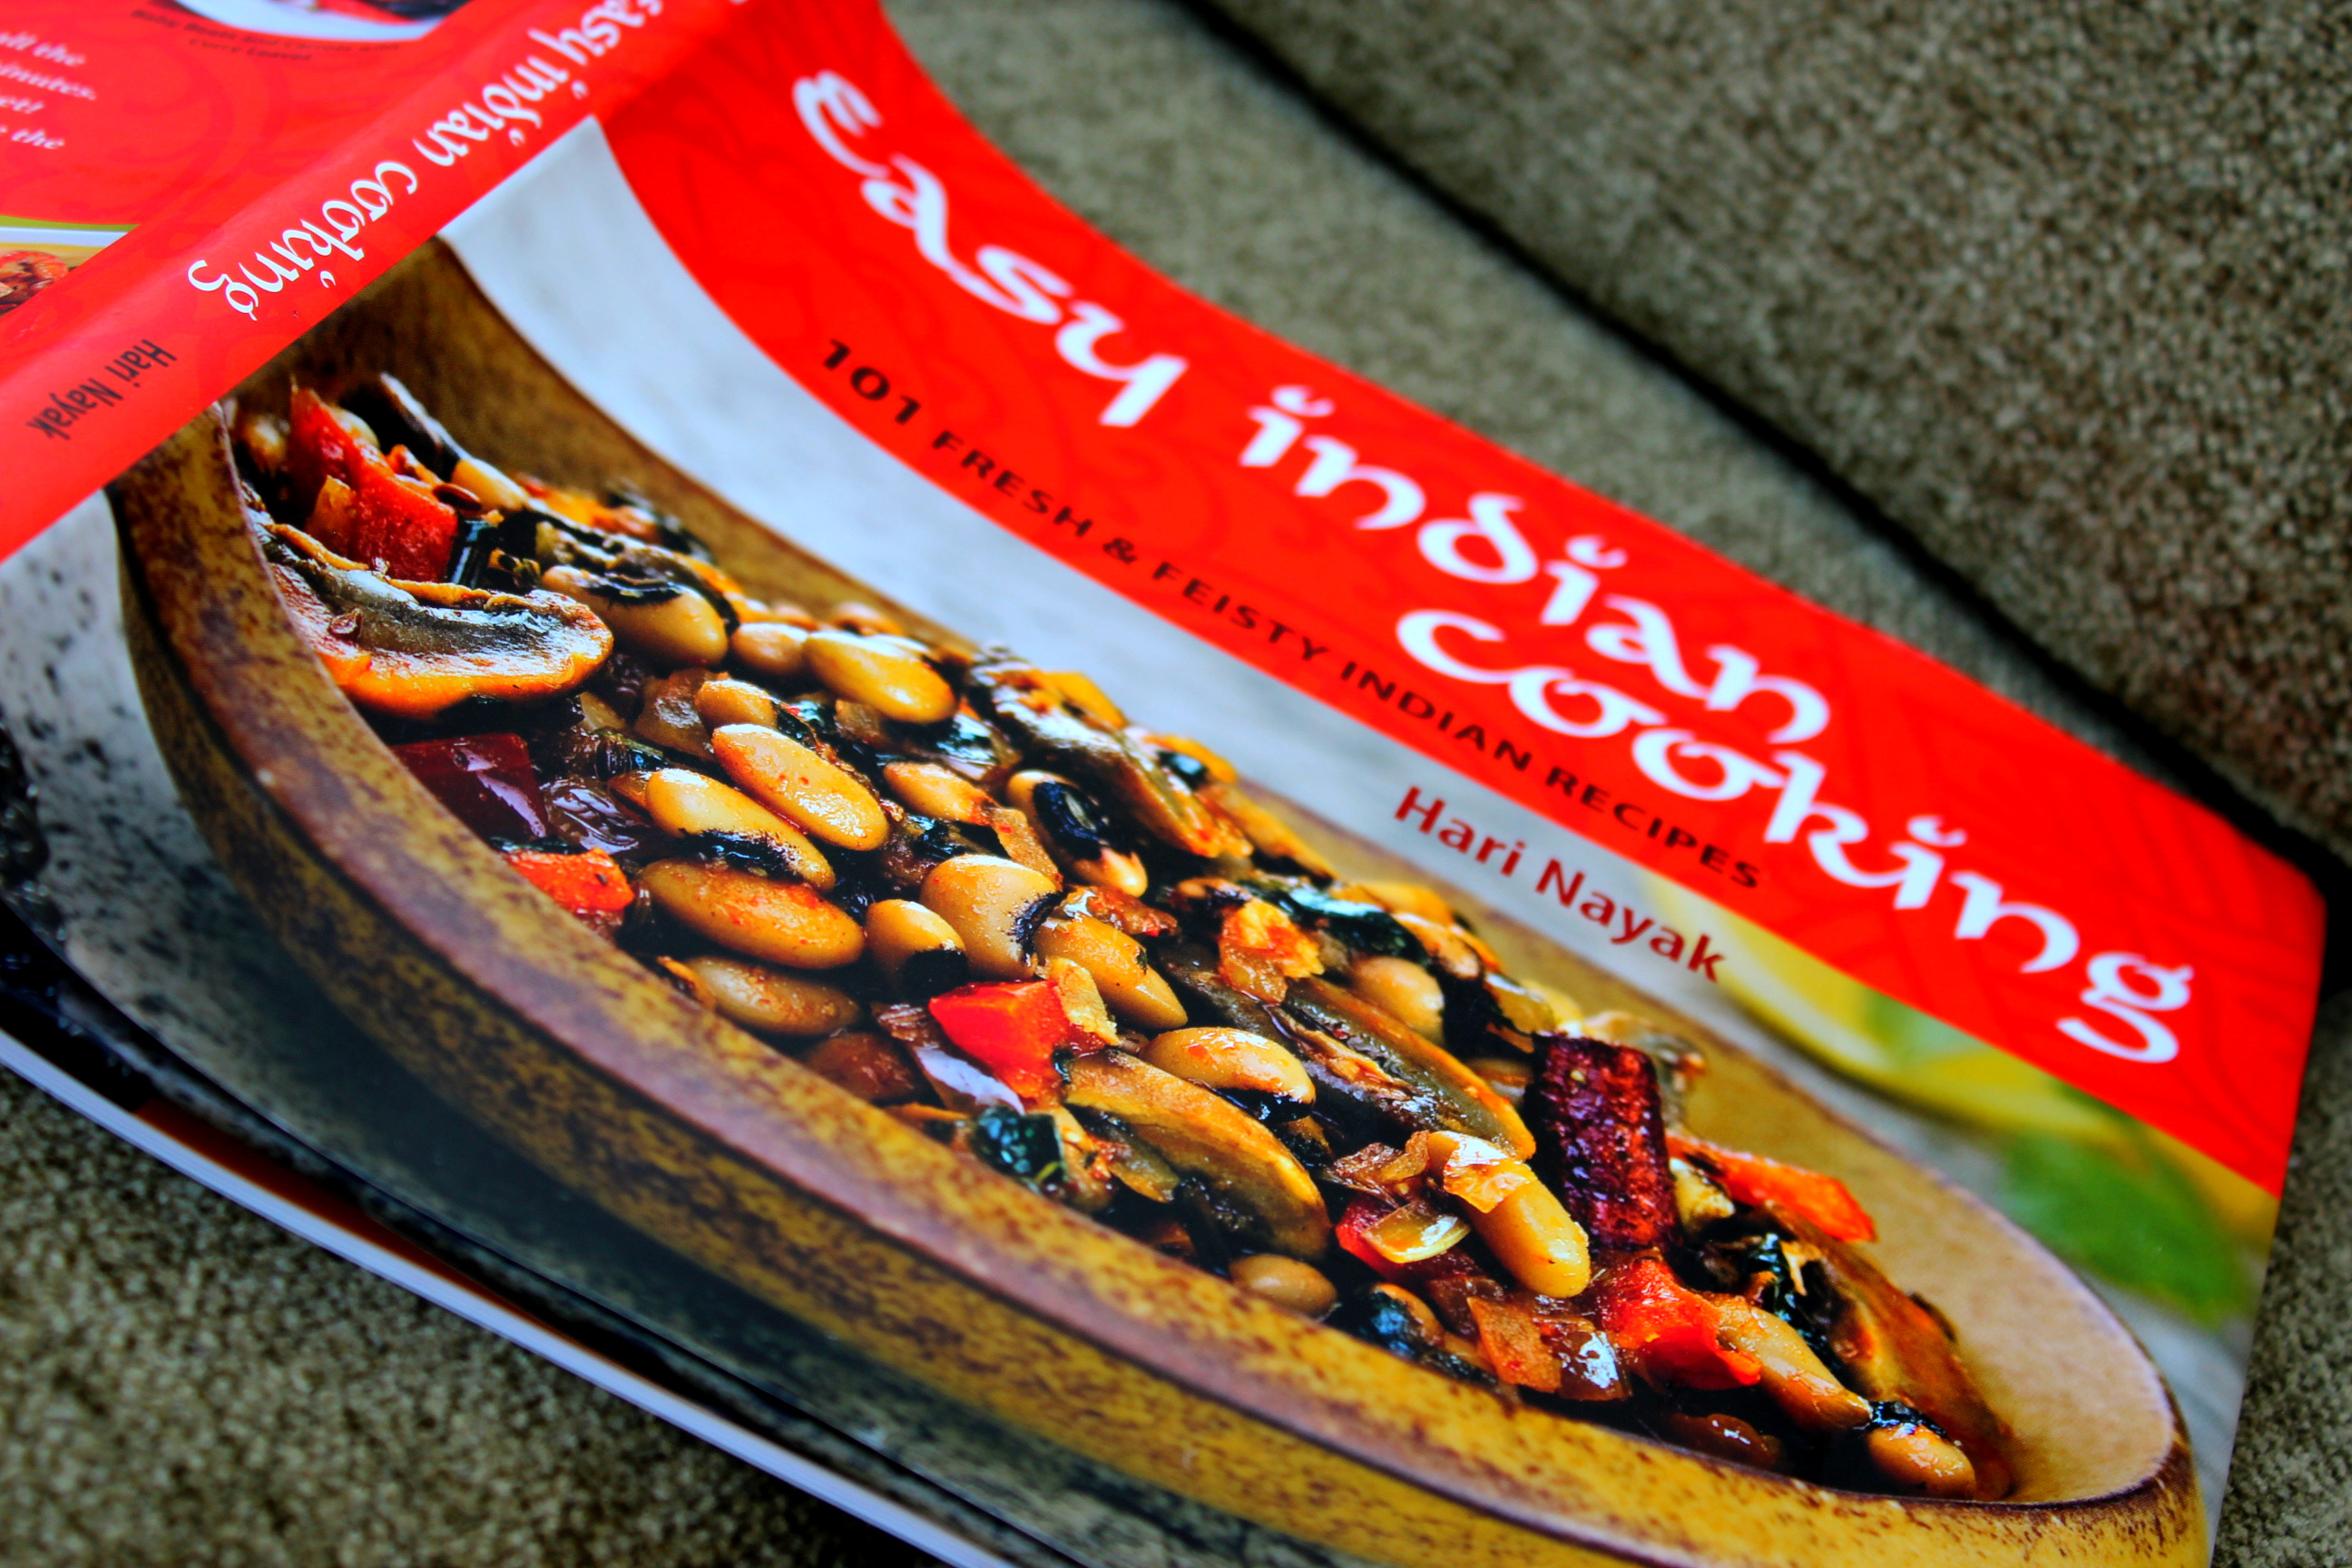 Book Review & A Quick Weekend Lunch: Easy Indian Cooking- By Hari Nayak